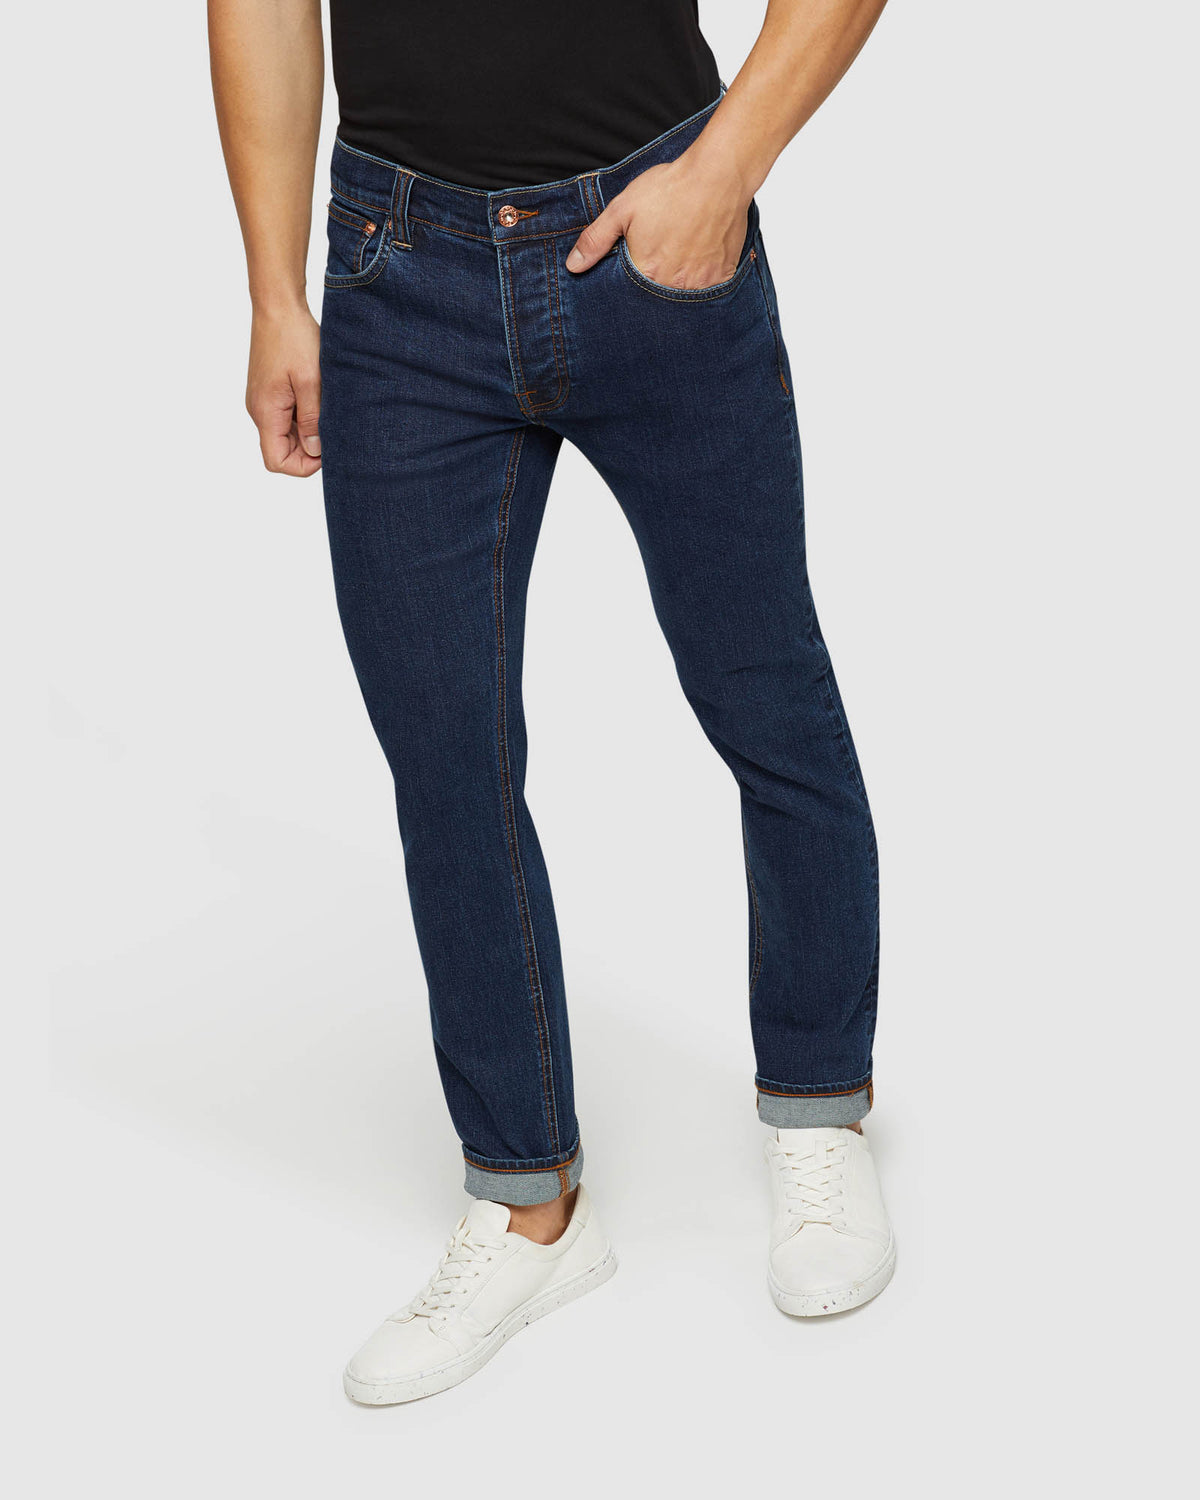 MARTY STONE ENZYME WASH DENIM JEANS MENS TROUSERS